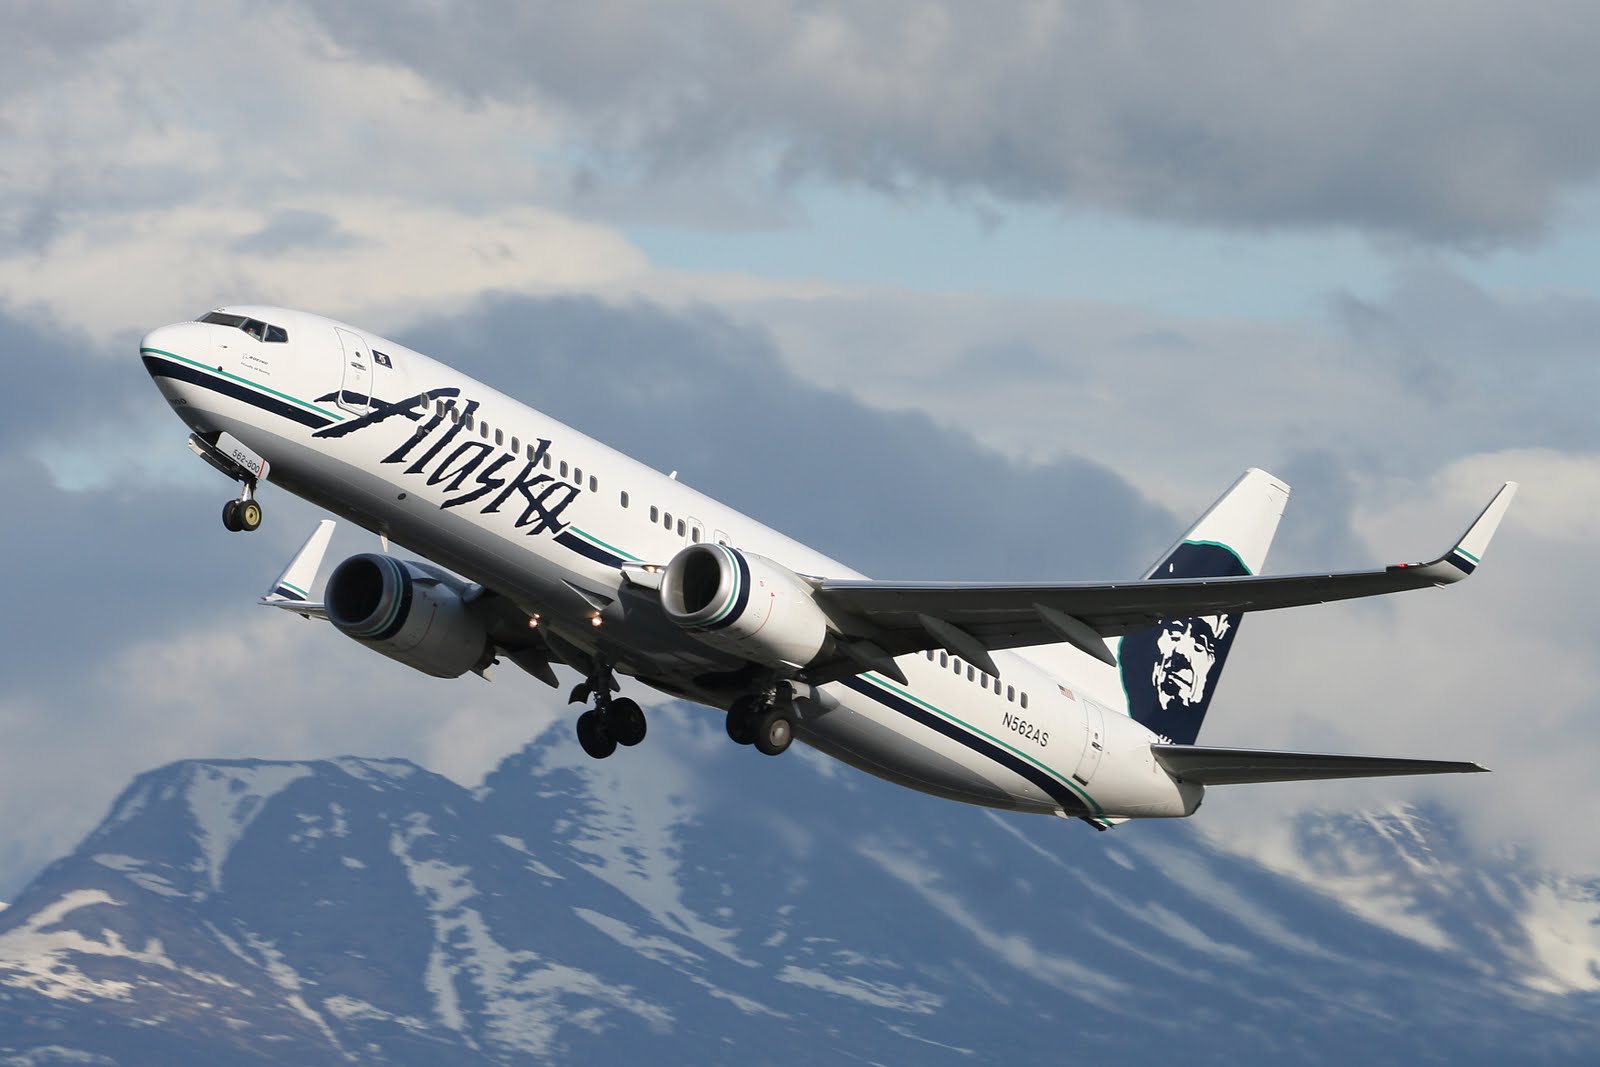 ... airlines alaska airlines wallpapers aircraft wallpapers 29000 27 02